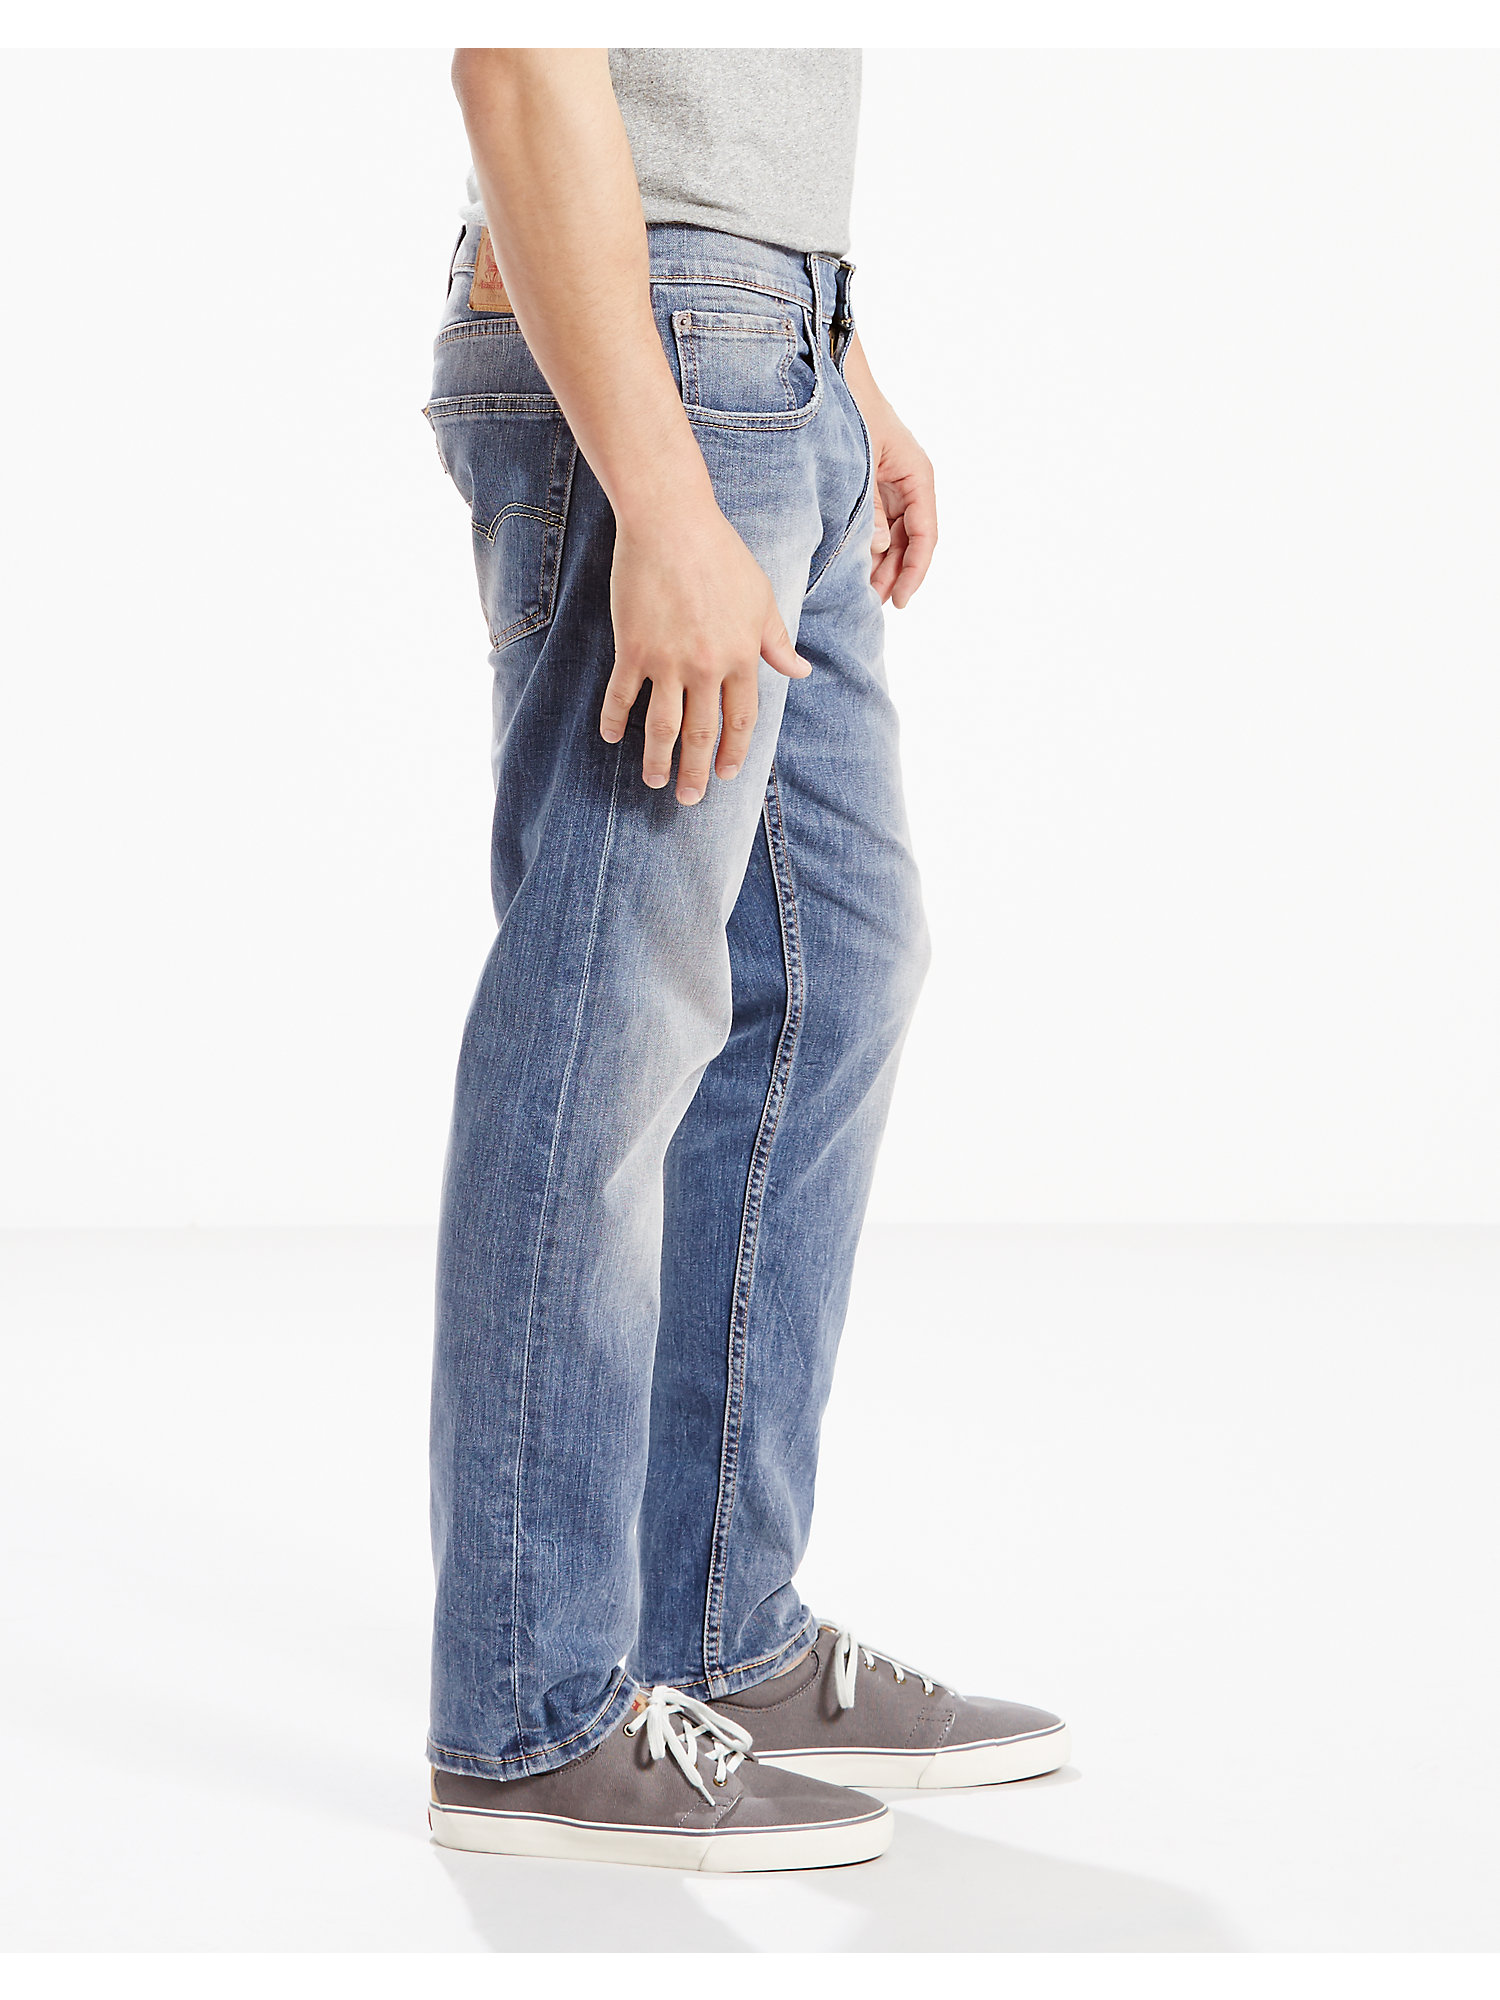 Levi's Mens 502 Regular Fit Stretch Tapered Jeans - image 5 of 8